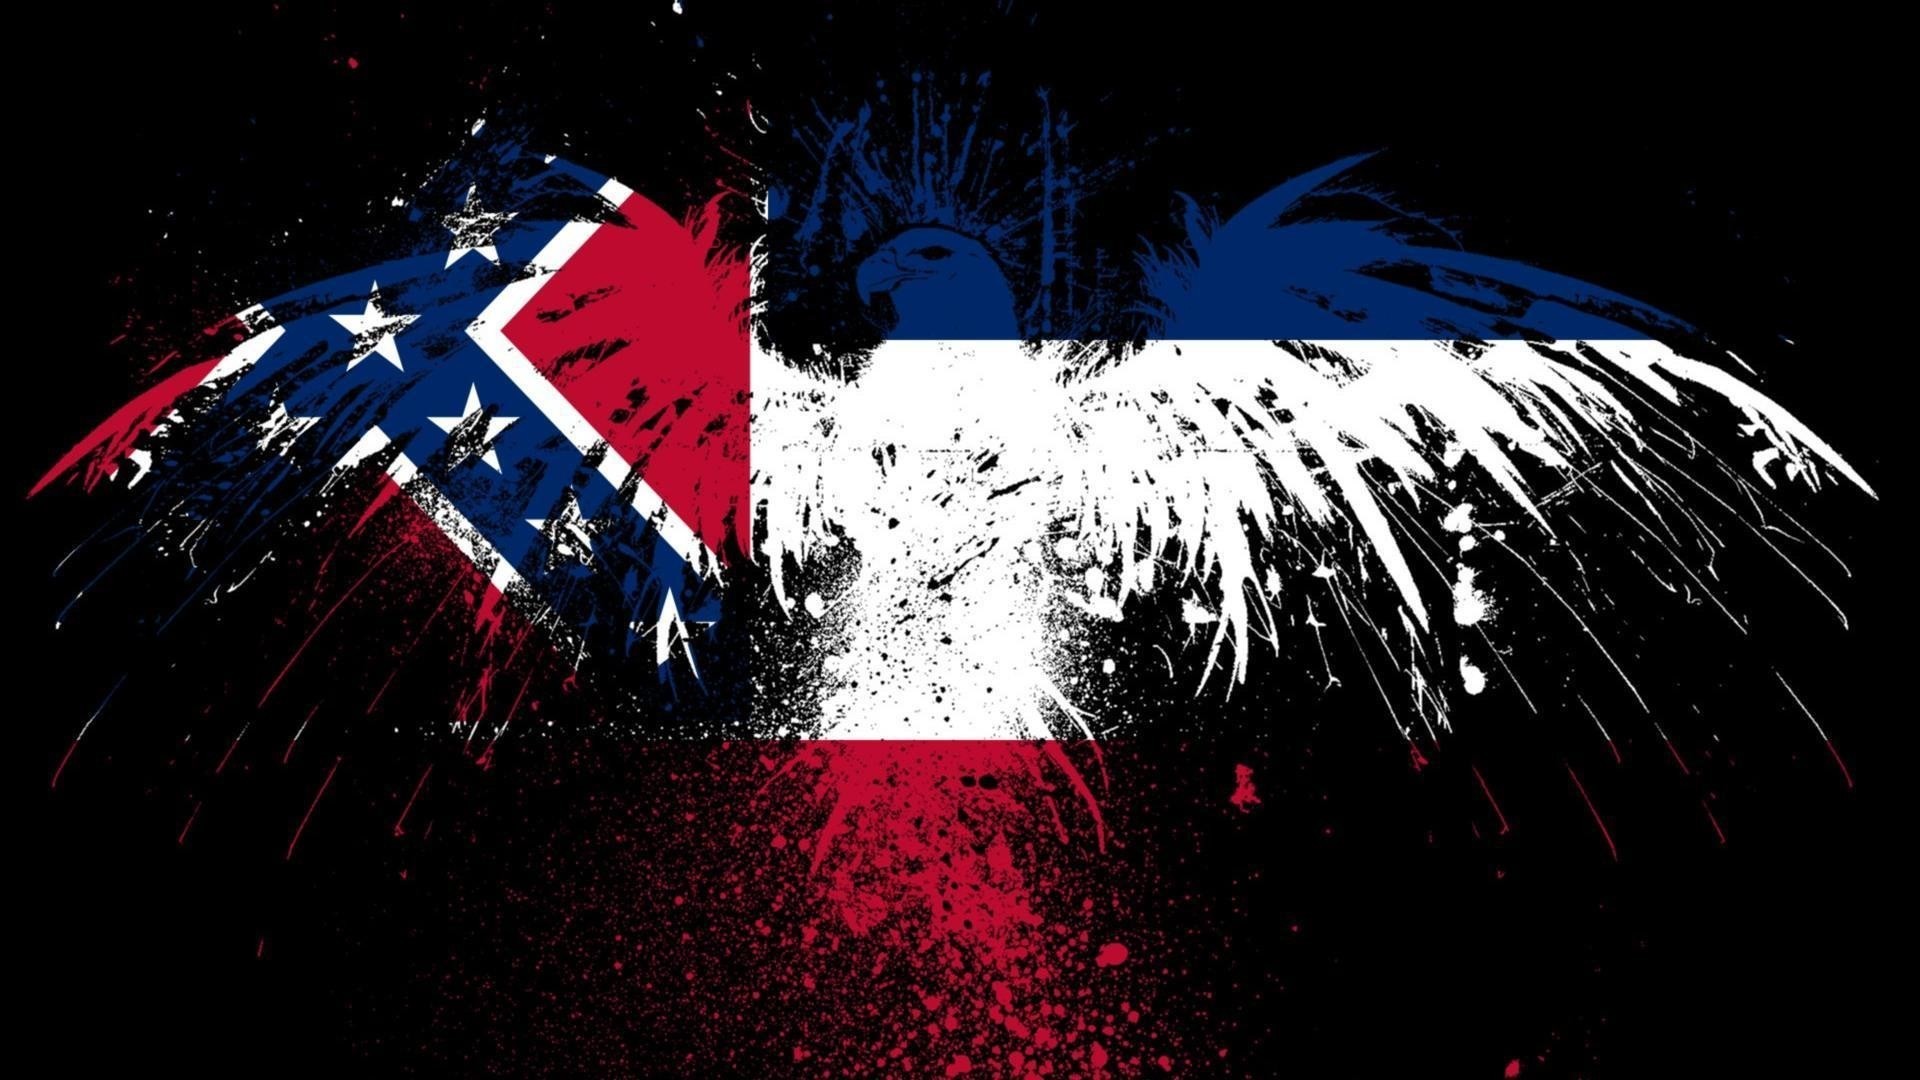 1920x1080 Rebel Flag Wallpaper For Android D37VC2X 568x355 px Source Â· Hd Confederate Flag  Wallpaper Confederate Flag Wallpapers Pictures